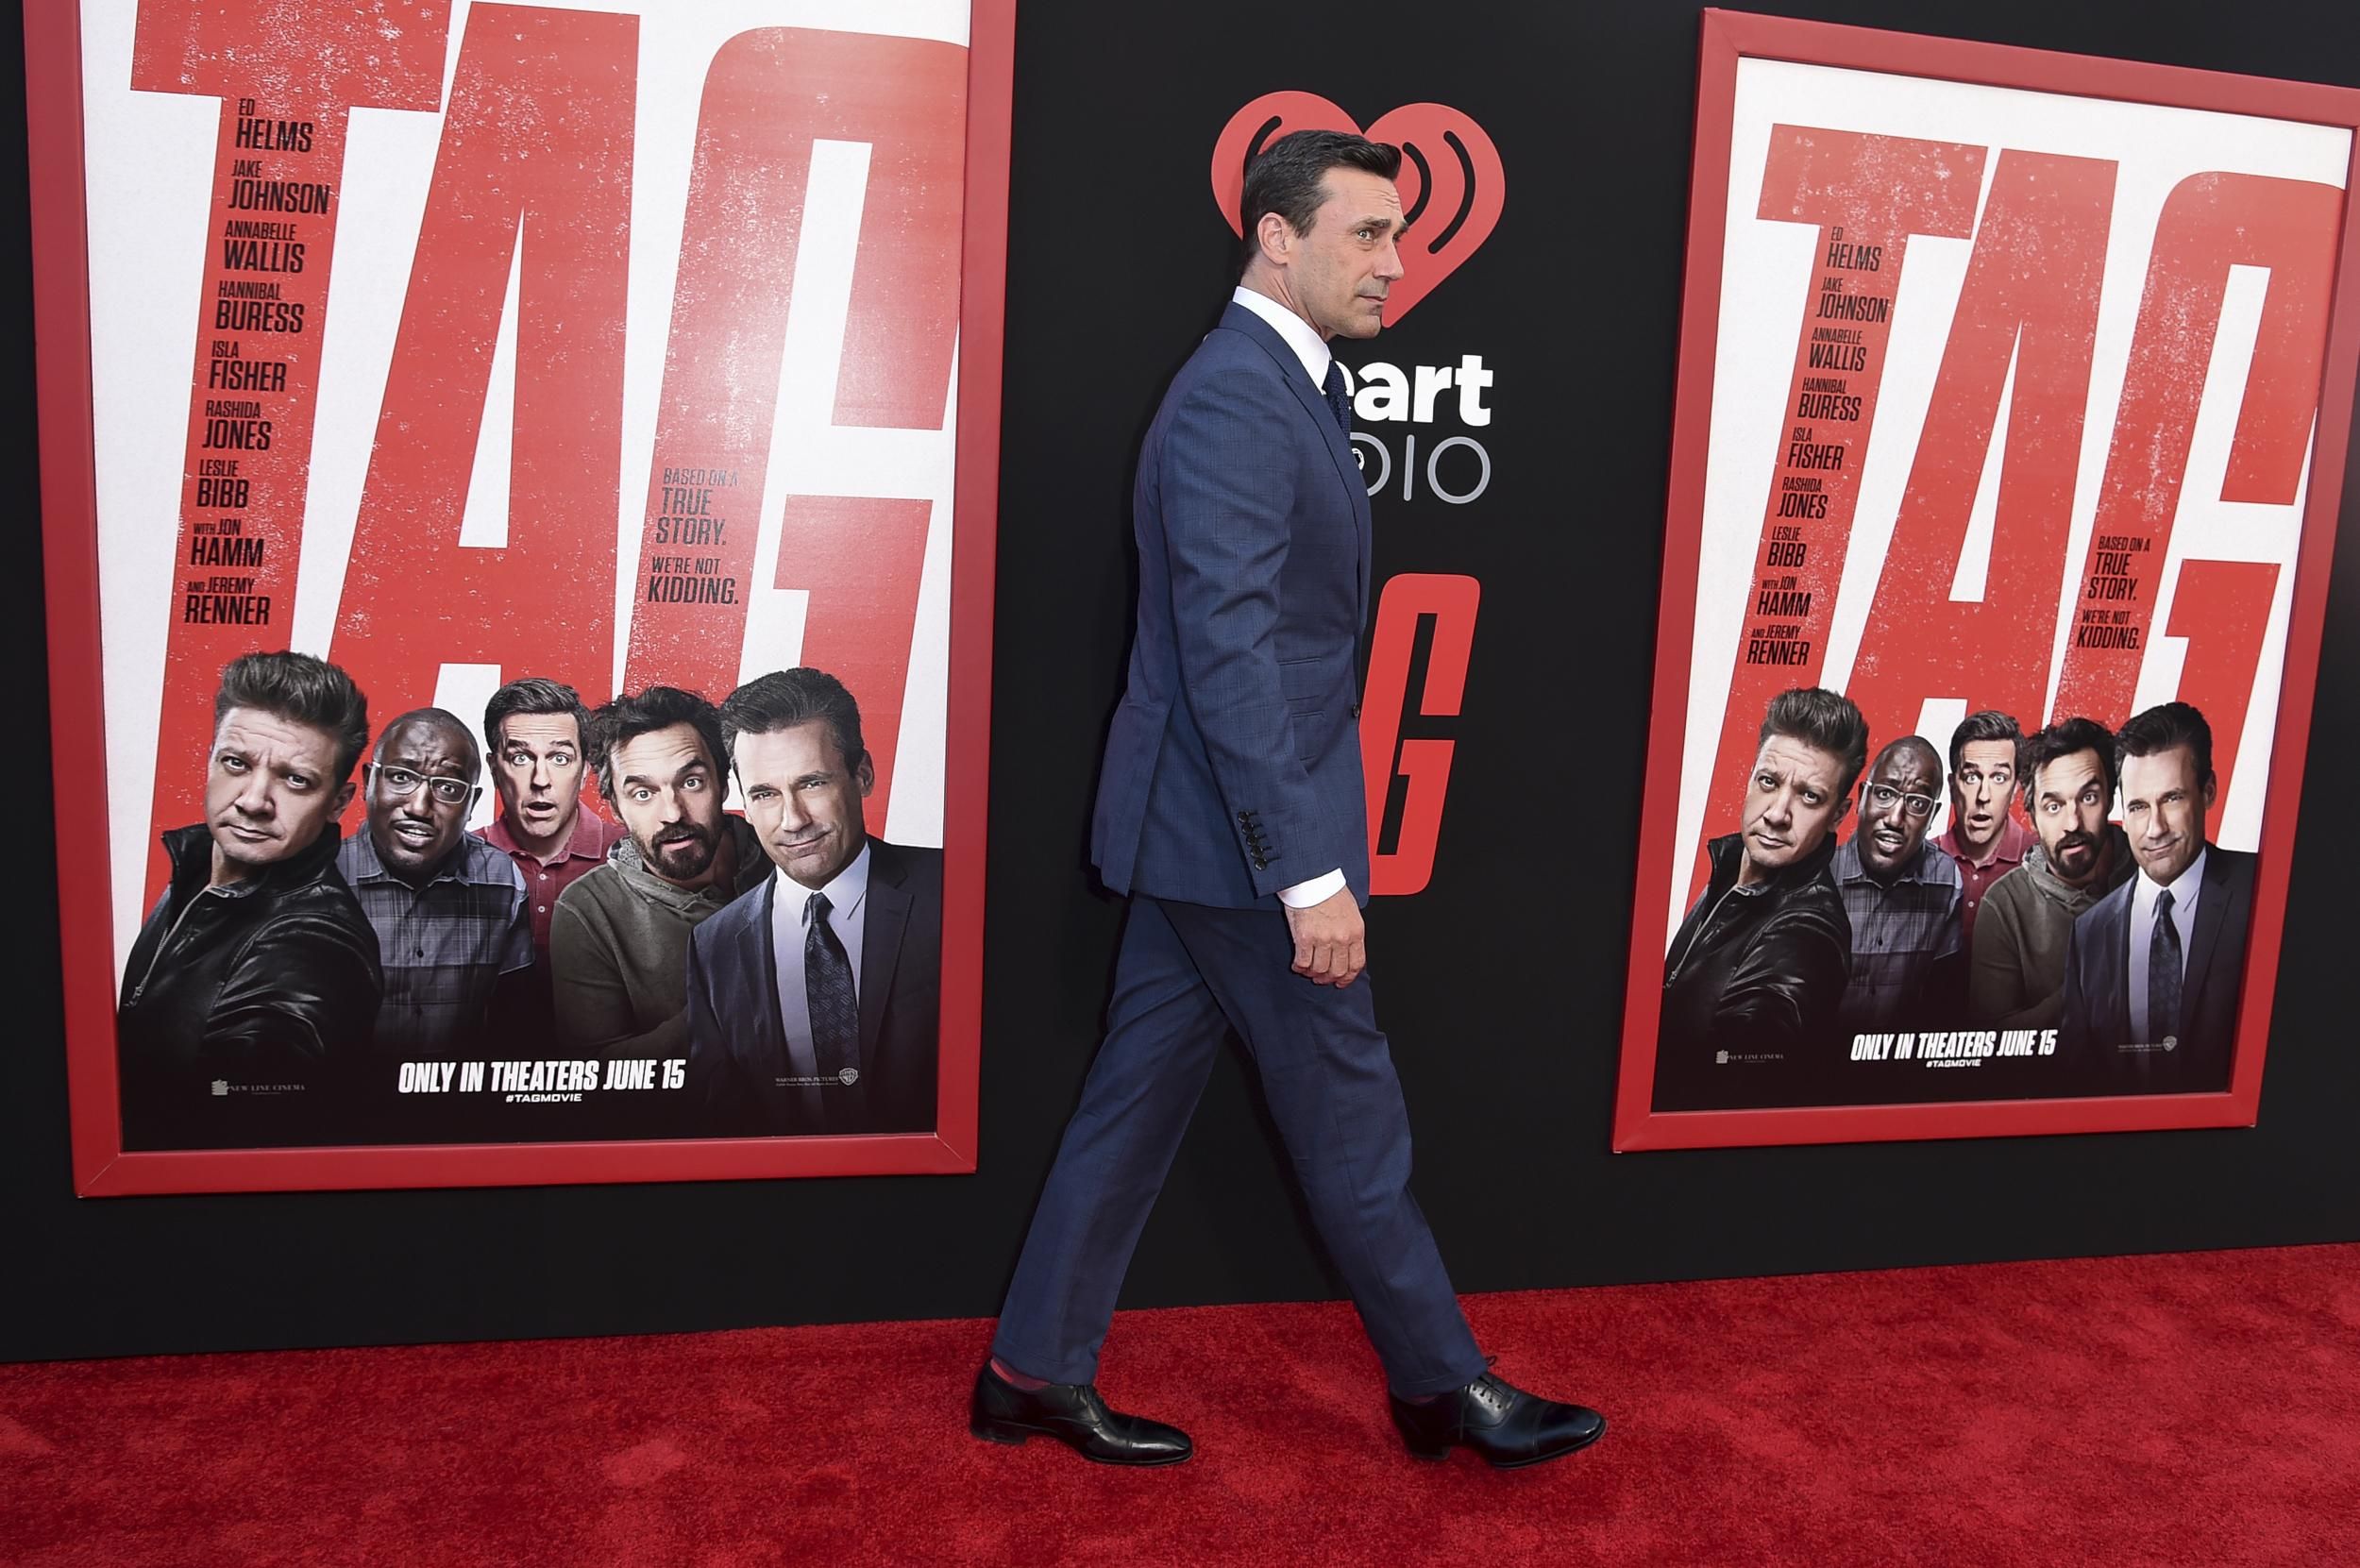 Tag movie review starring Jon Hamm and Ed Helms